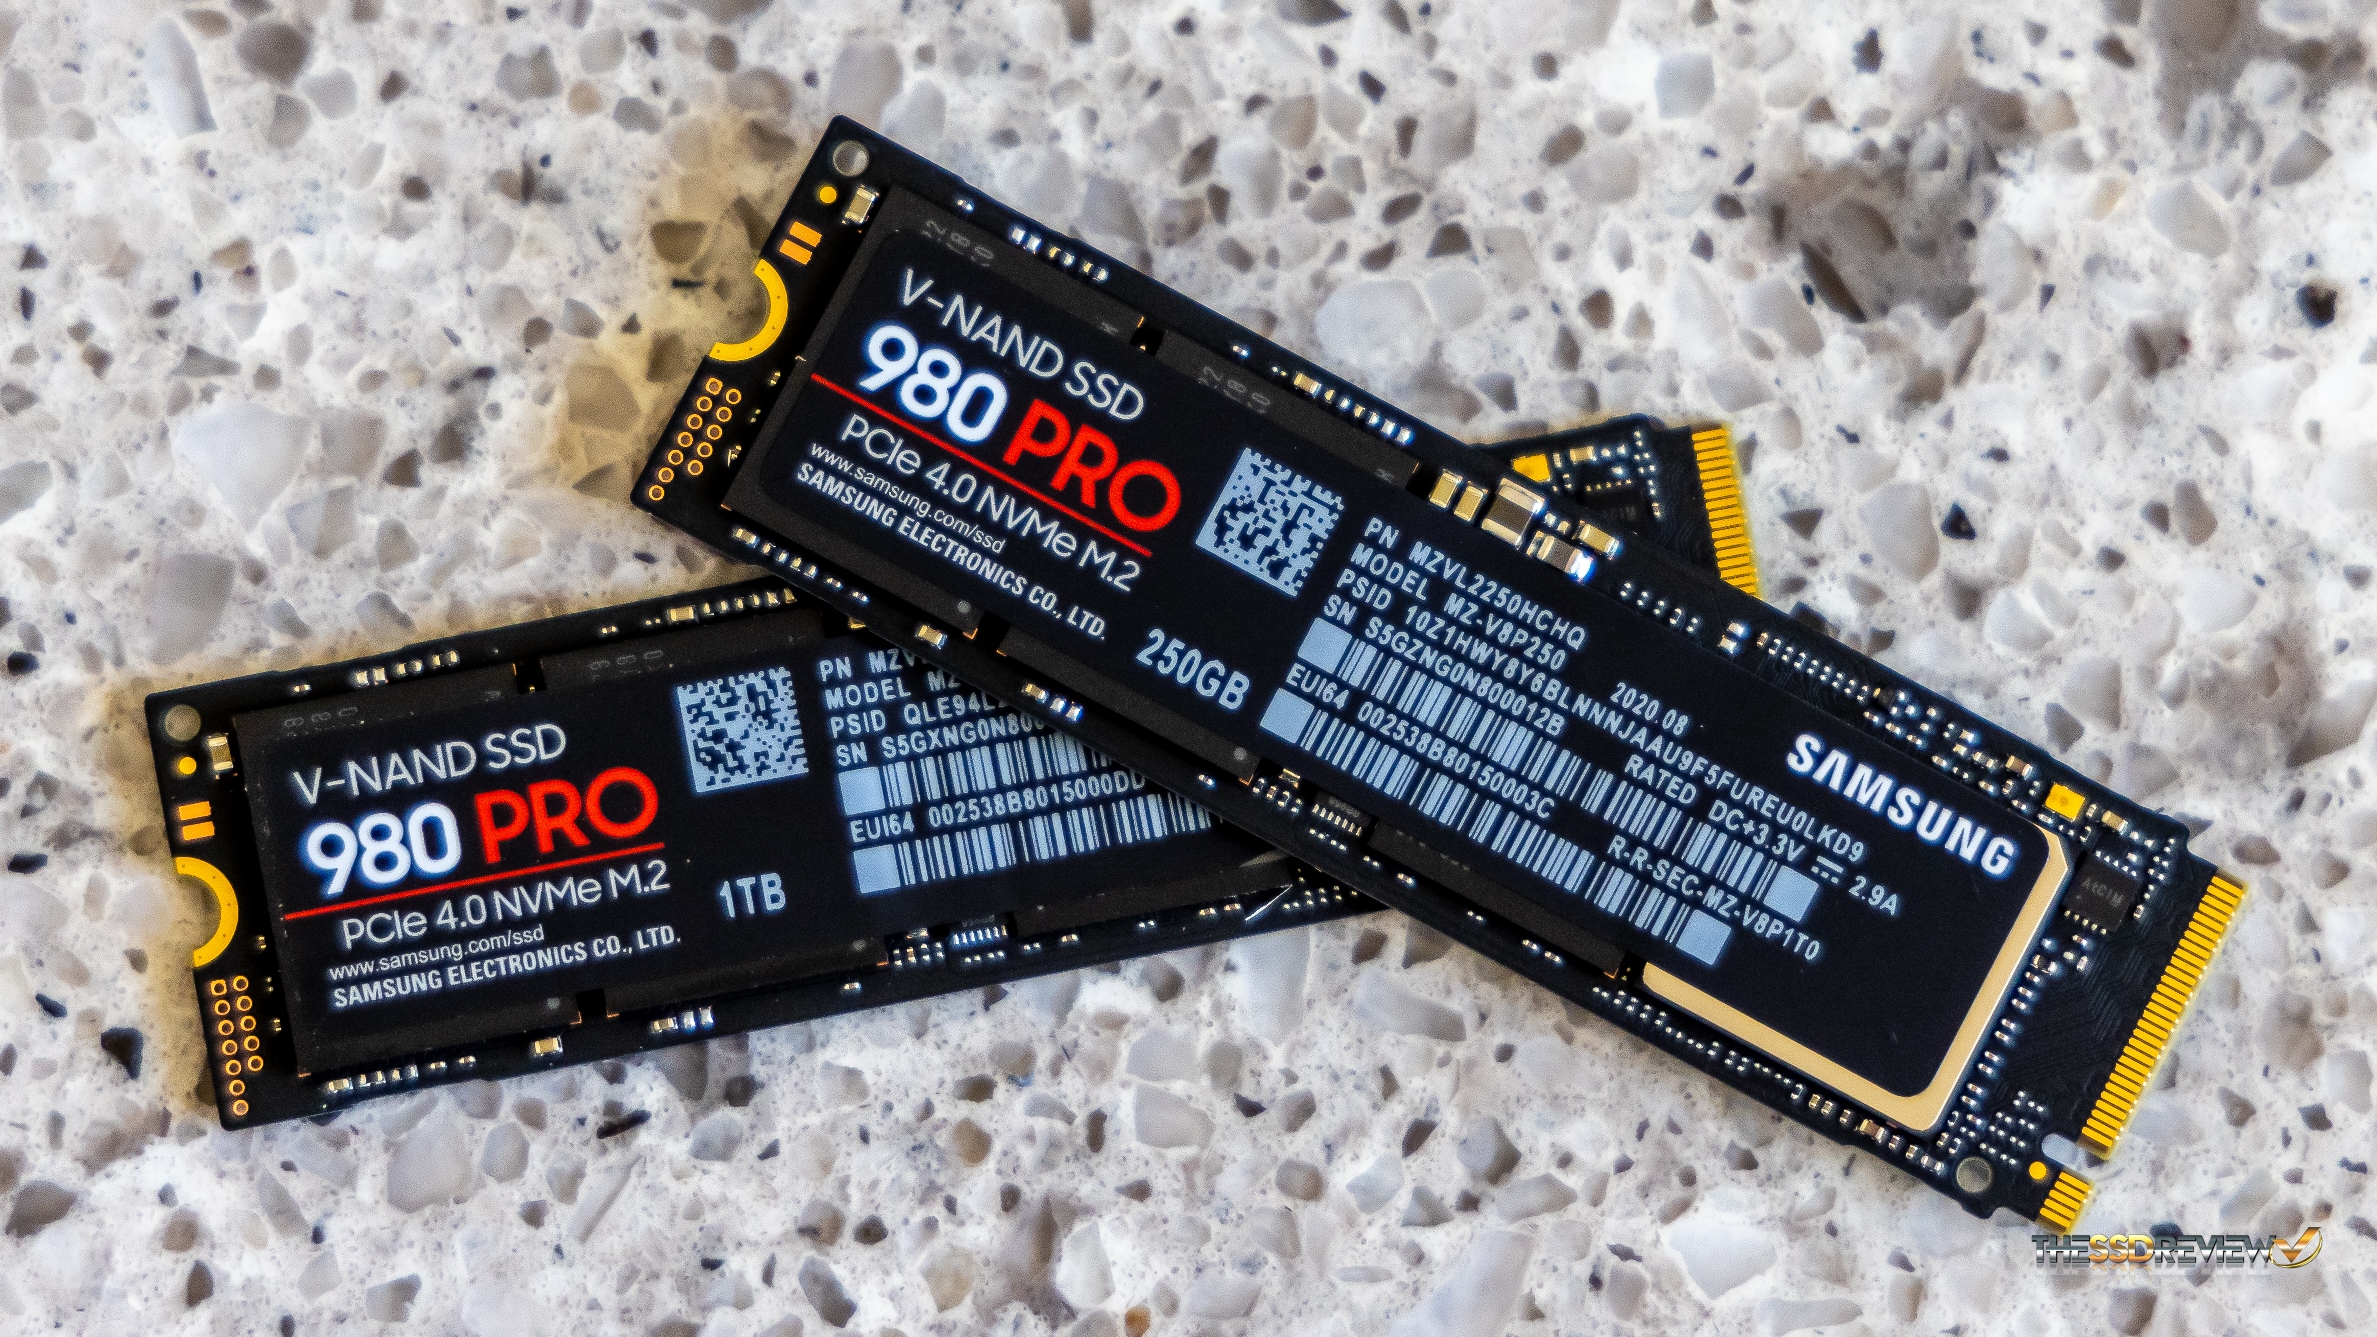 Elucidation fair Children Center Samsung 980 Pro Gen 4 NVMe SSD Review (1TB/250GB) - 7GB/s Speed with Cooler  Temps | The SSD Review